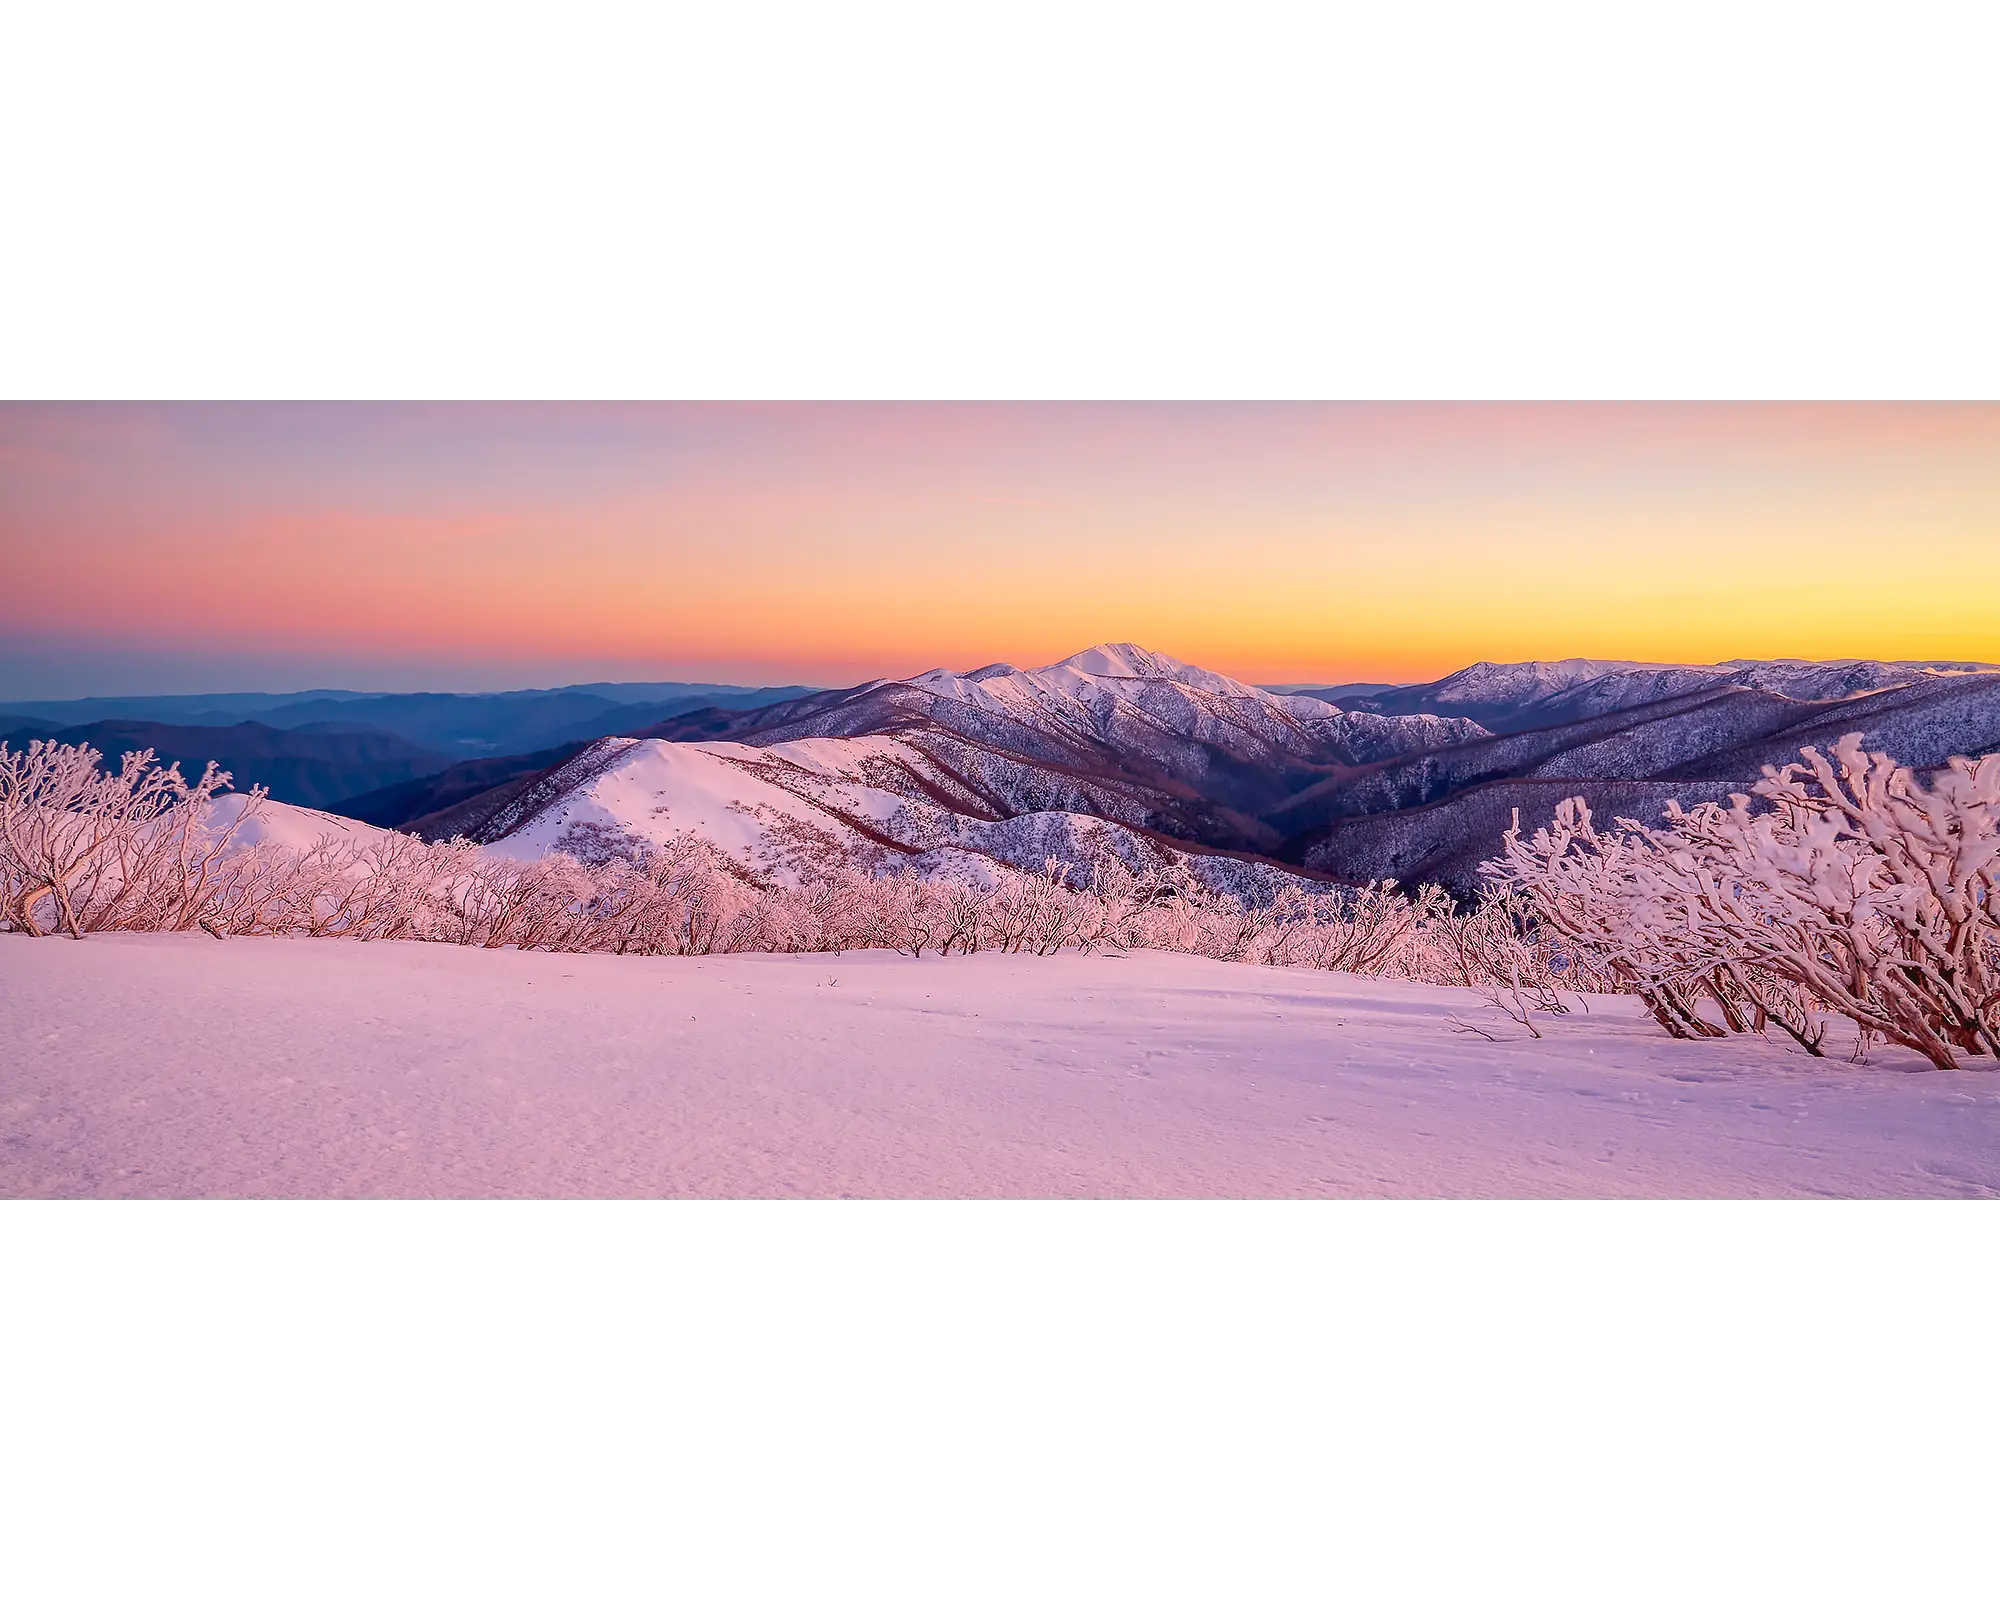 Mount Feathertop with snow and pink sunrise.